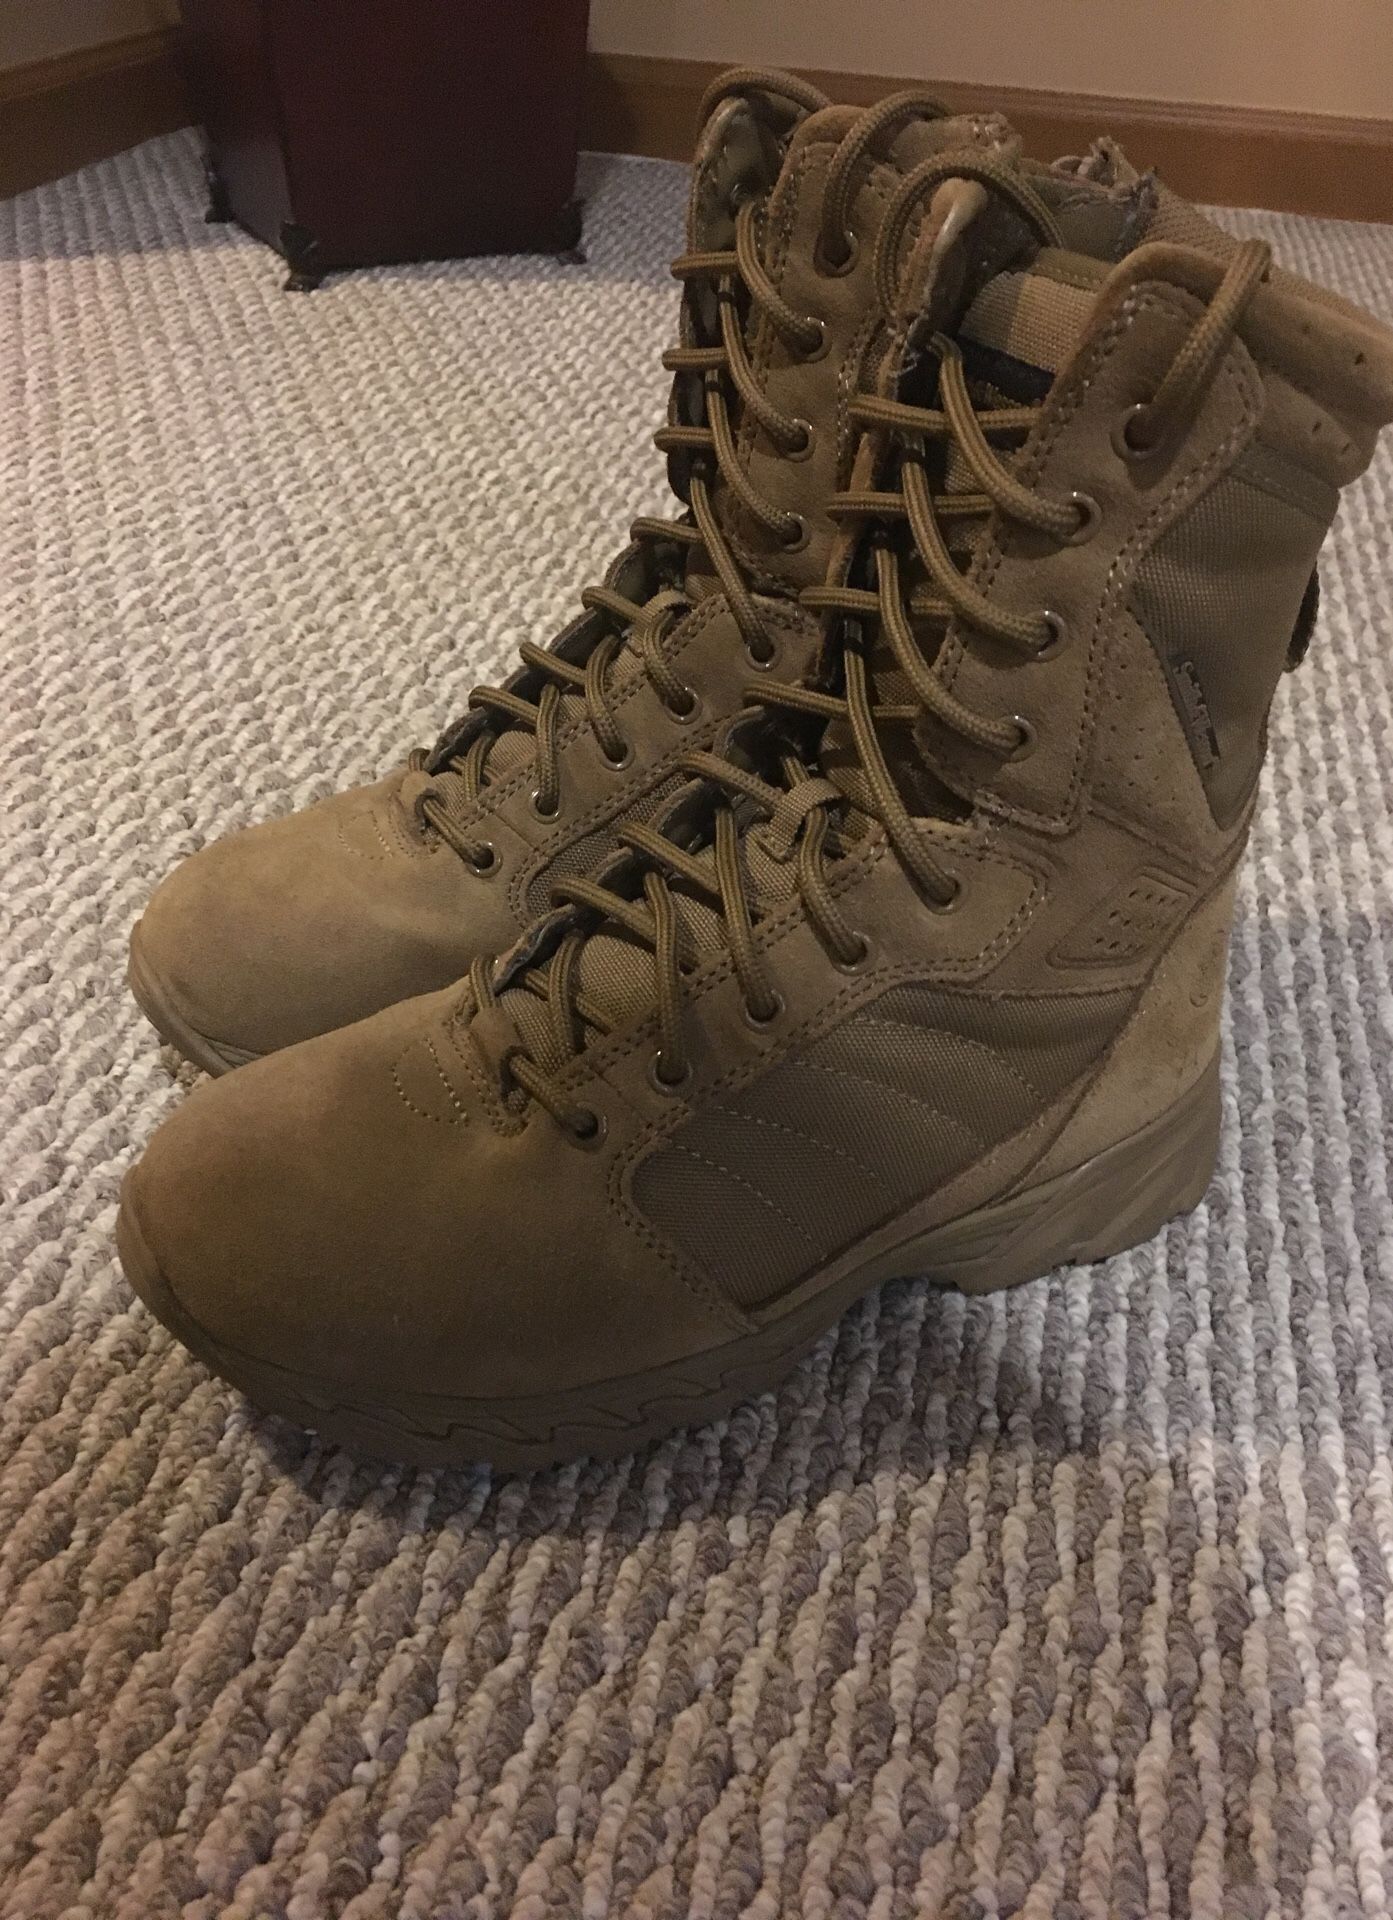 Smith and Wesson Rucking/Hiking Boots-Size 7 Men